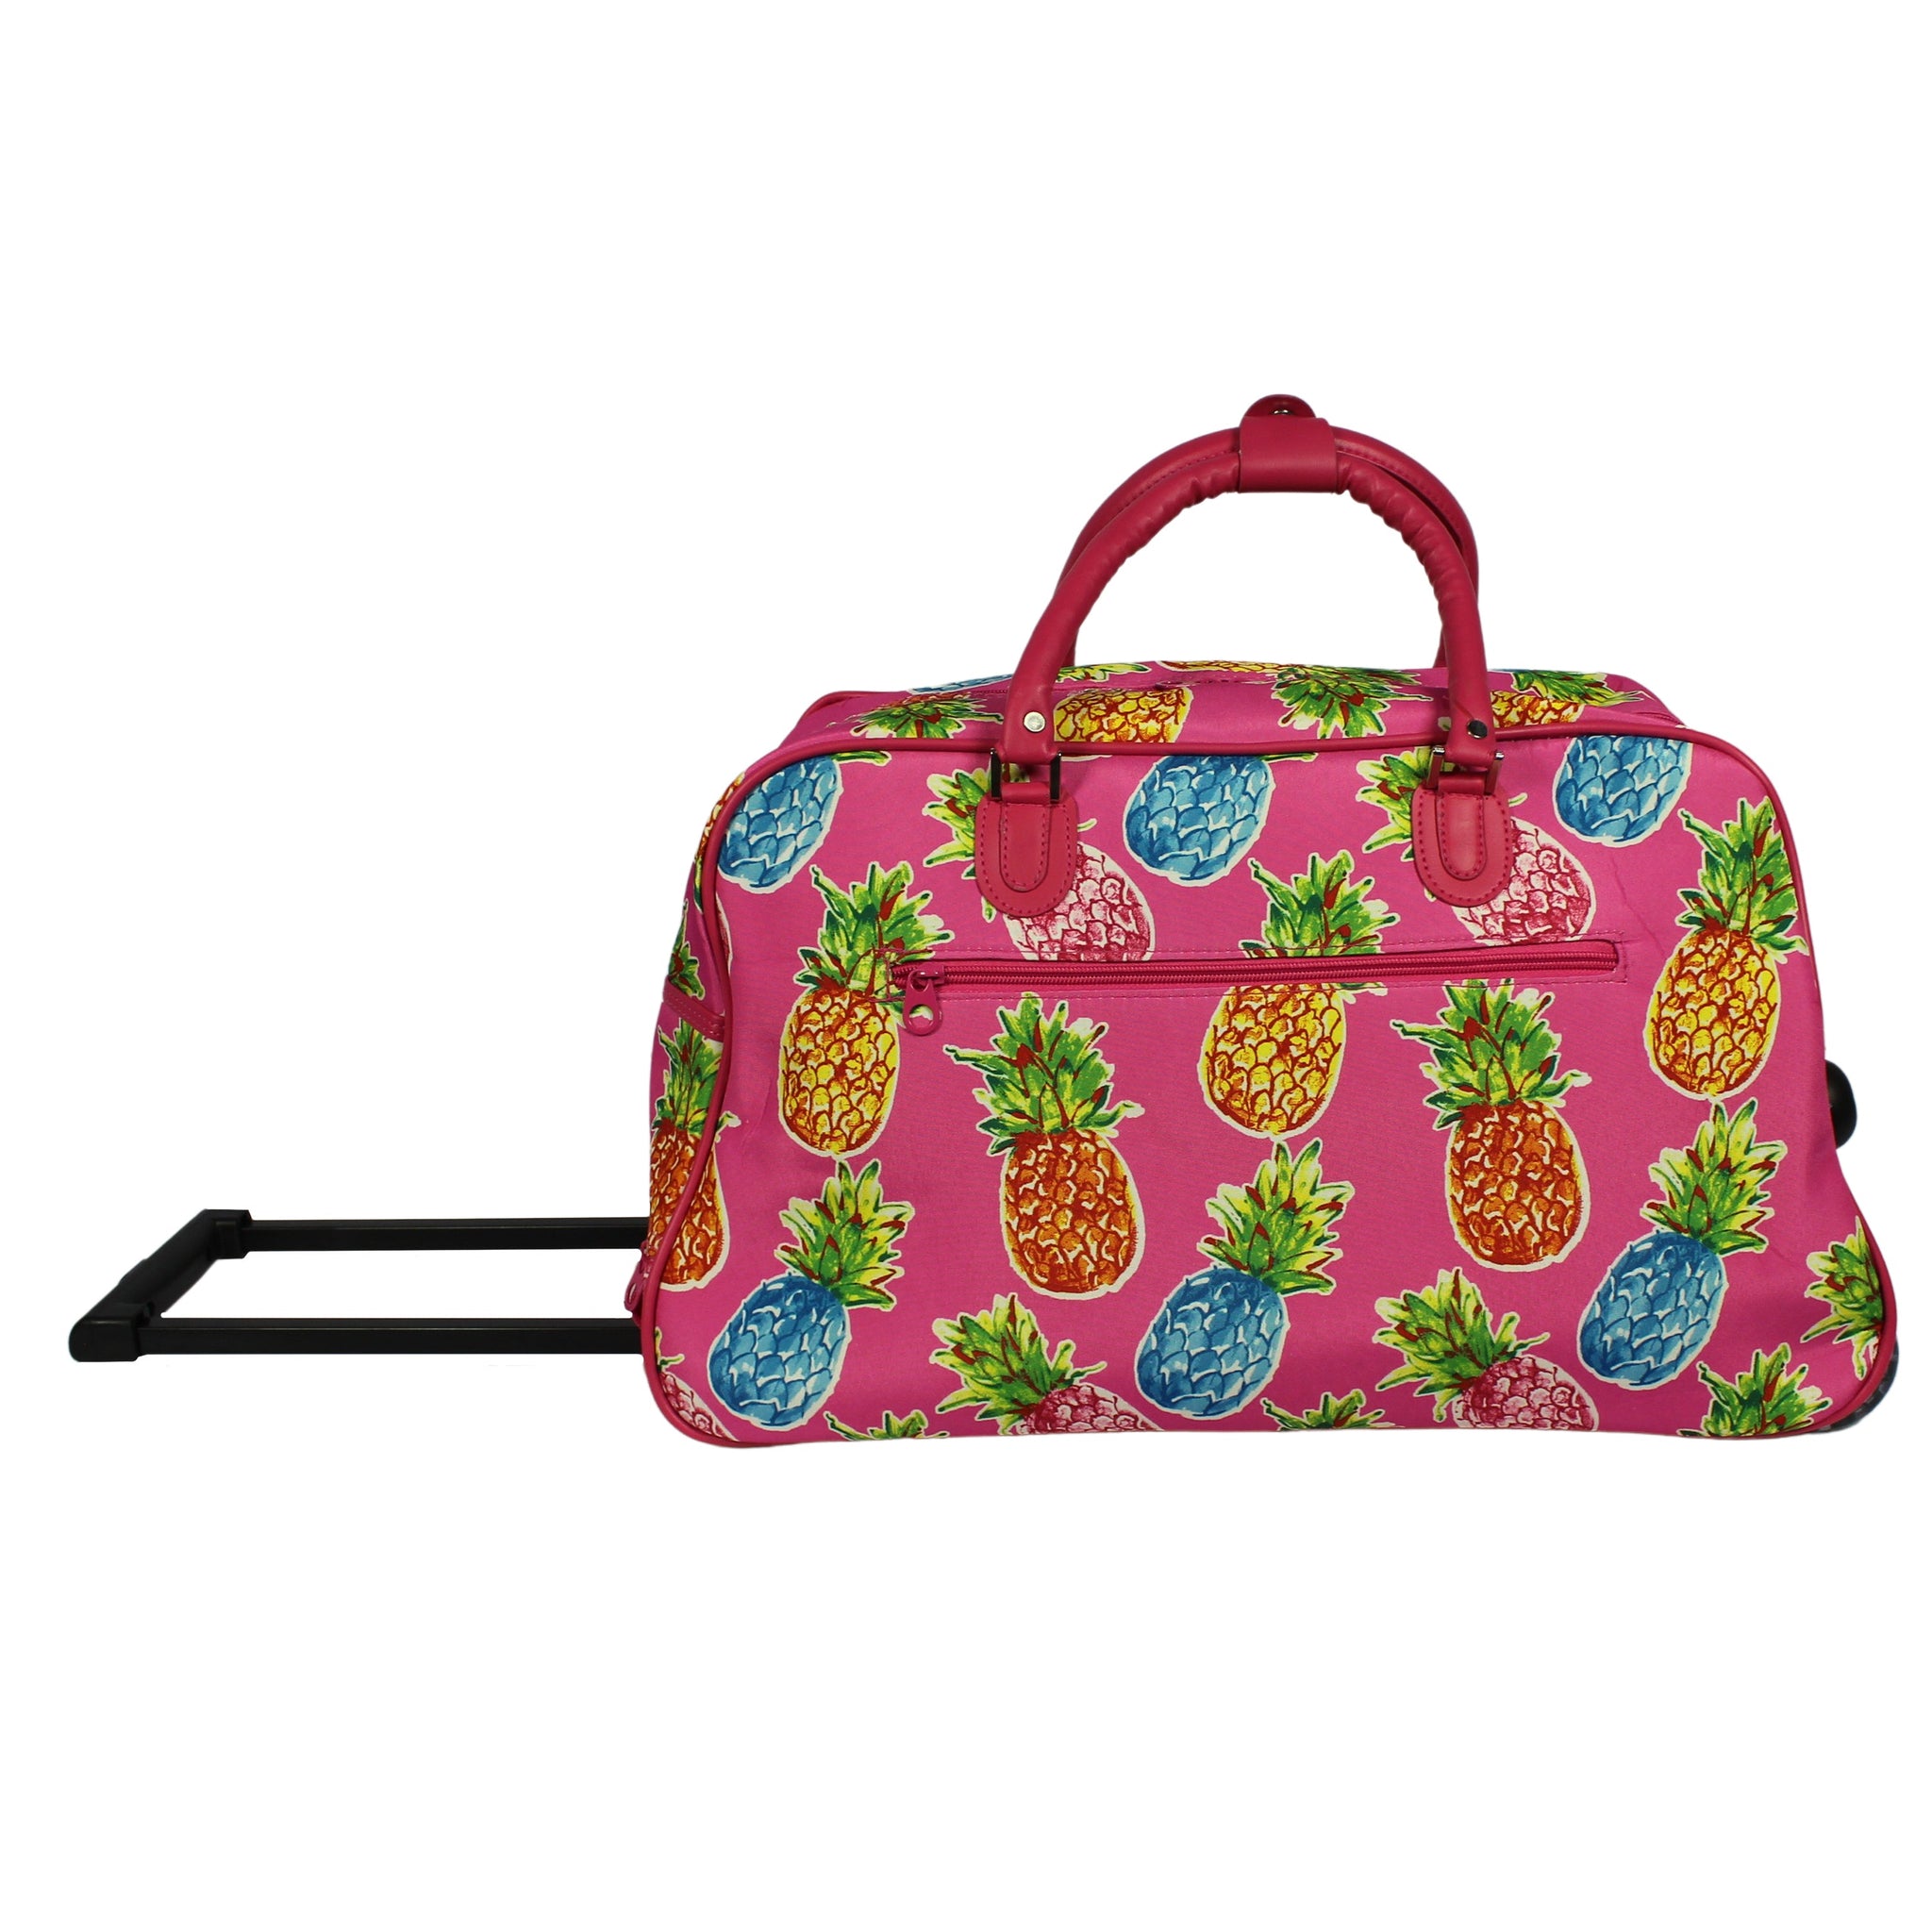 CalBags 21" Rolling Carry-On Duffel Bag - Pineapple